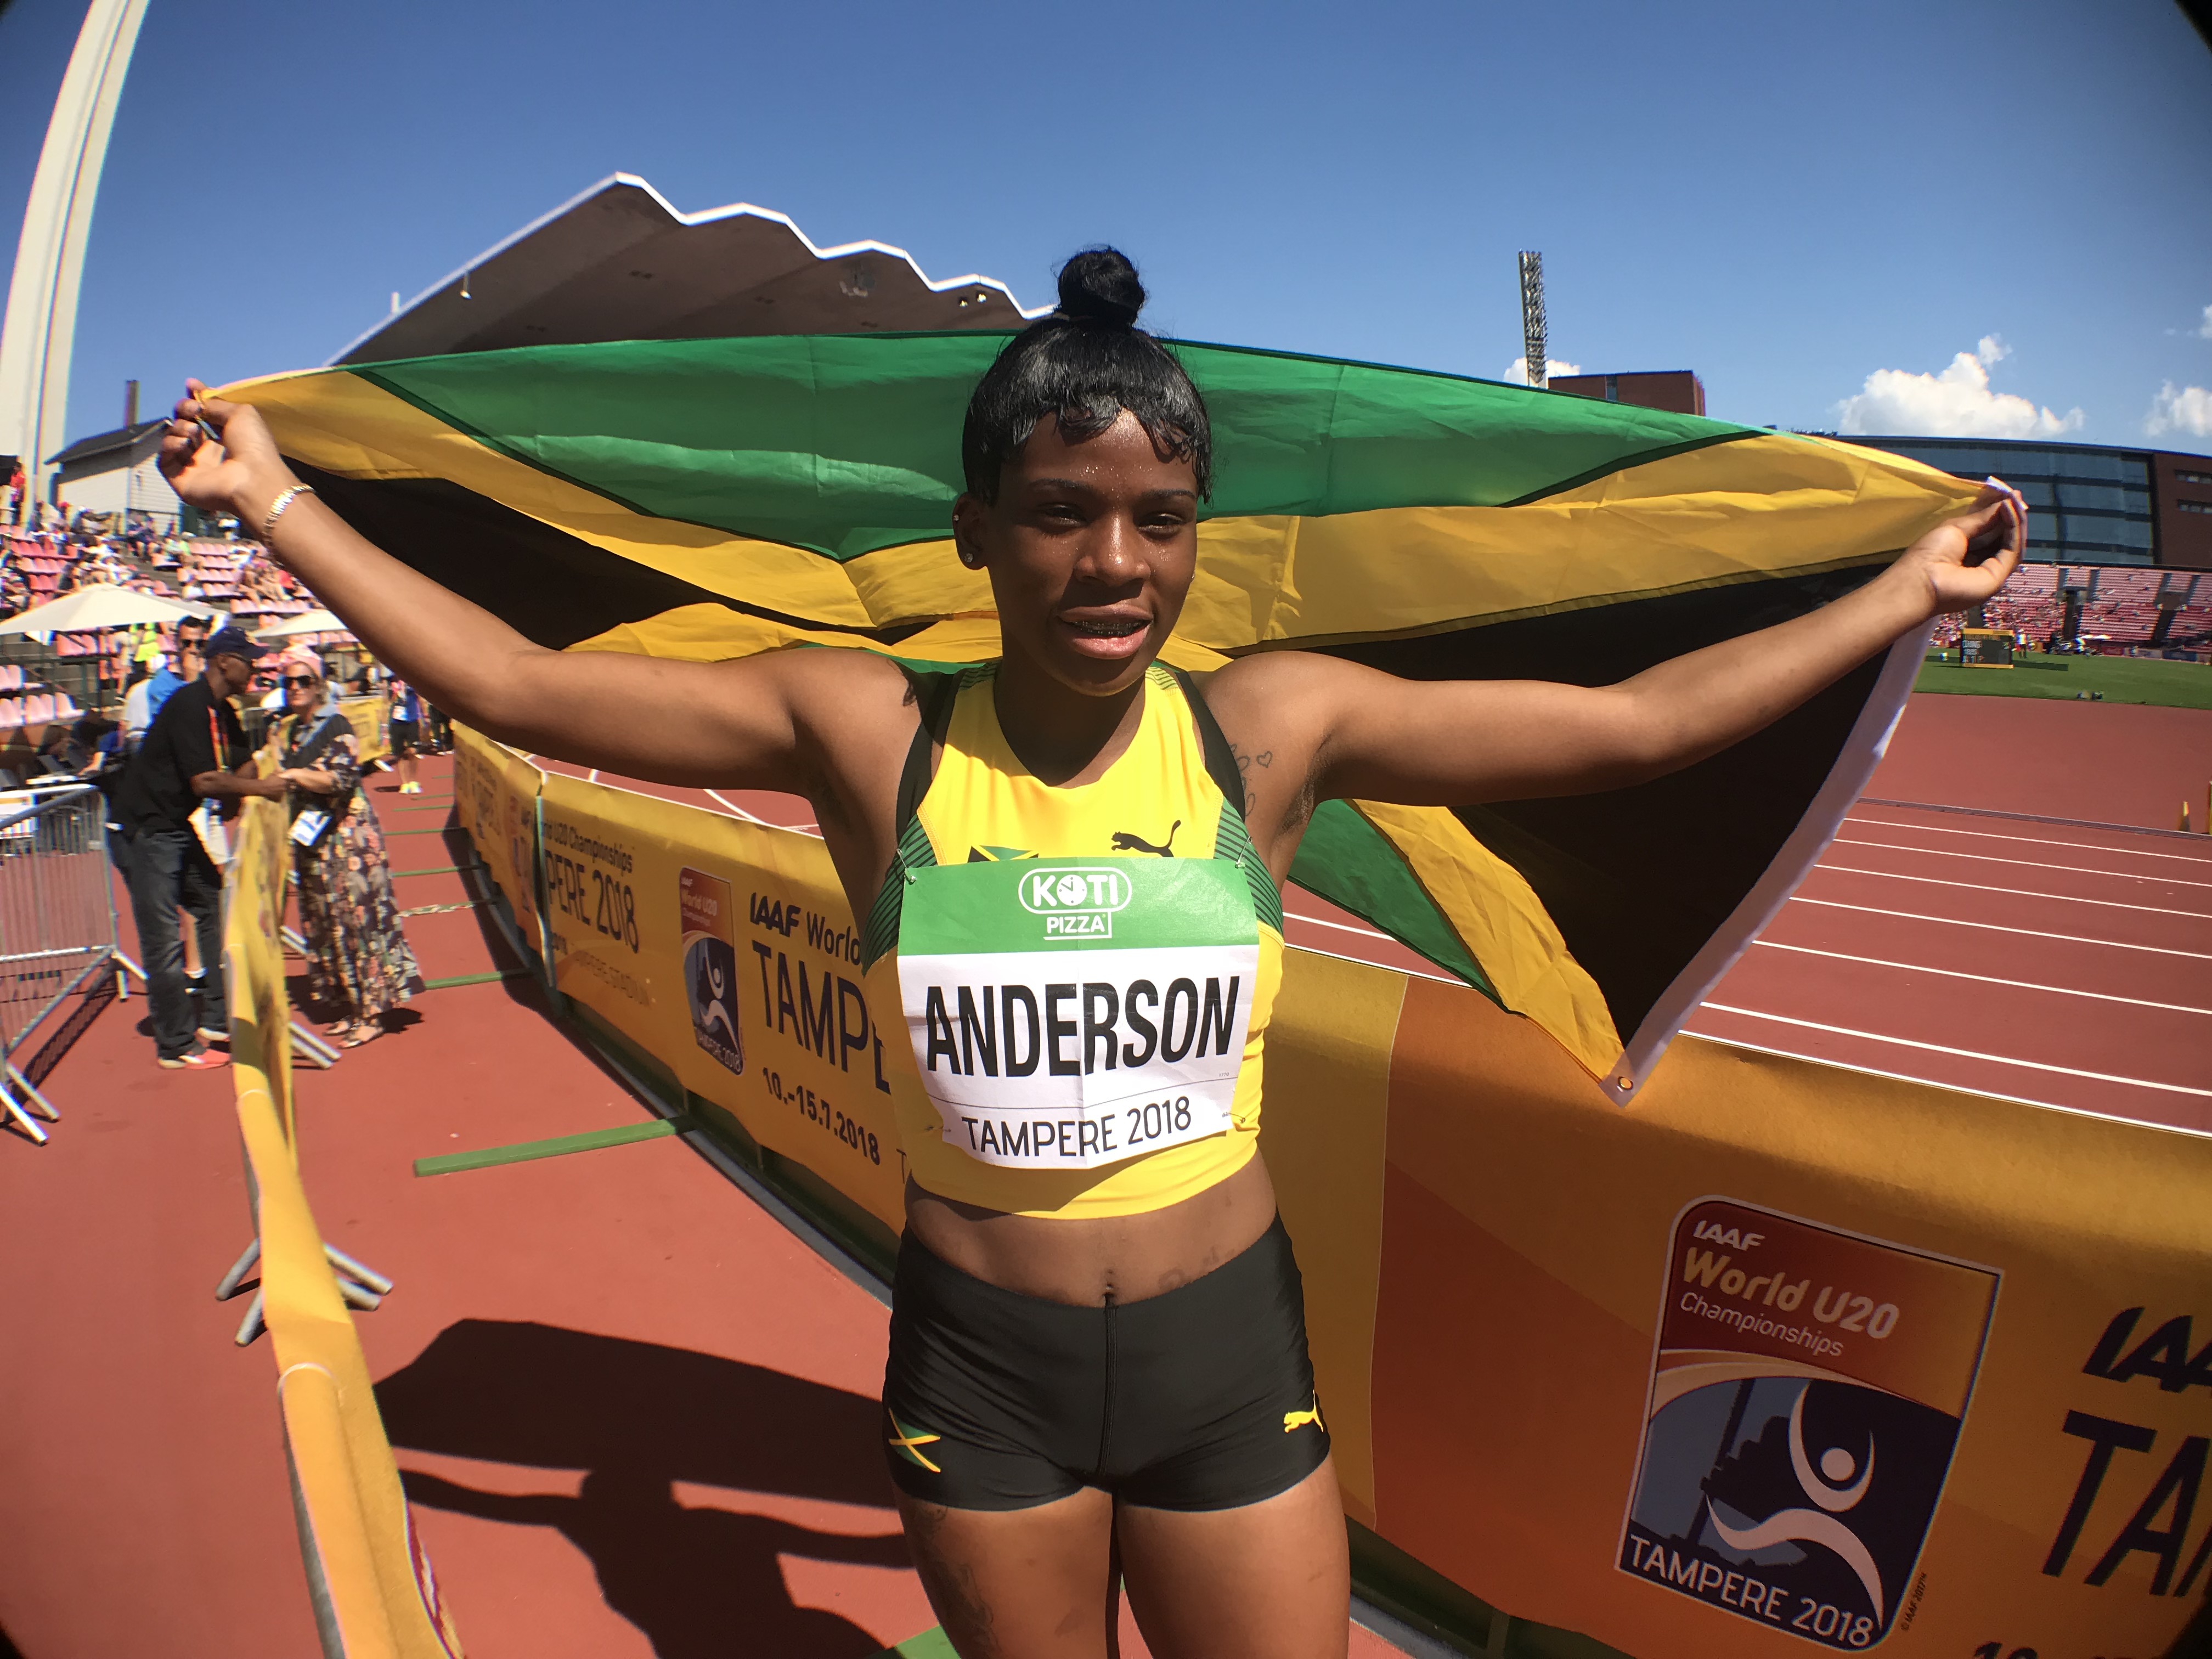 Brittany Anderson runs PB; Christania Williams 7.18 in early rounds at American Track League